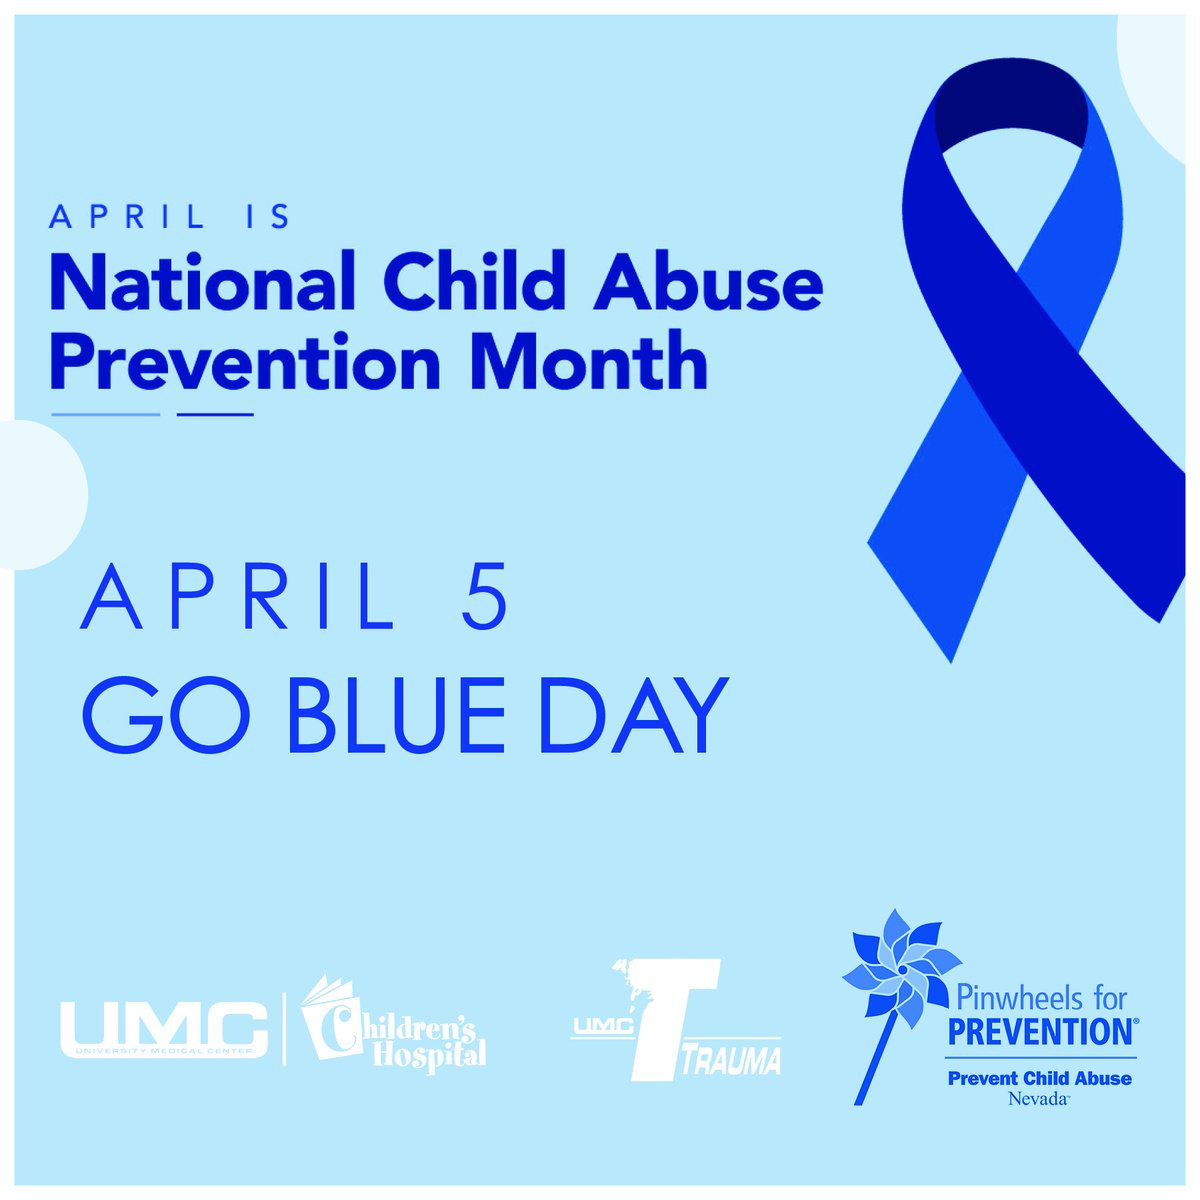 April is Child Abuse Prevention Month. We all need to do our part to protect the social and emotional well-being of children in Southern Nevada. Wear blue tomorrow to bring awareness to this important issue! 💙 Learn more about how to prevent child abuse: preventchildabusenevada.org